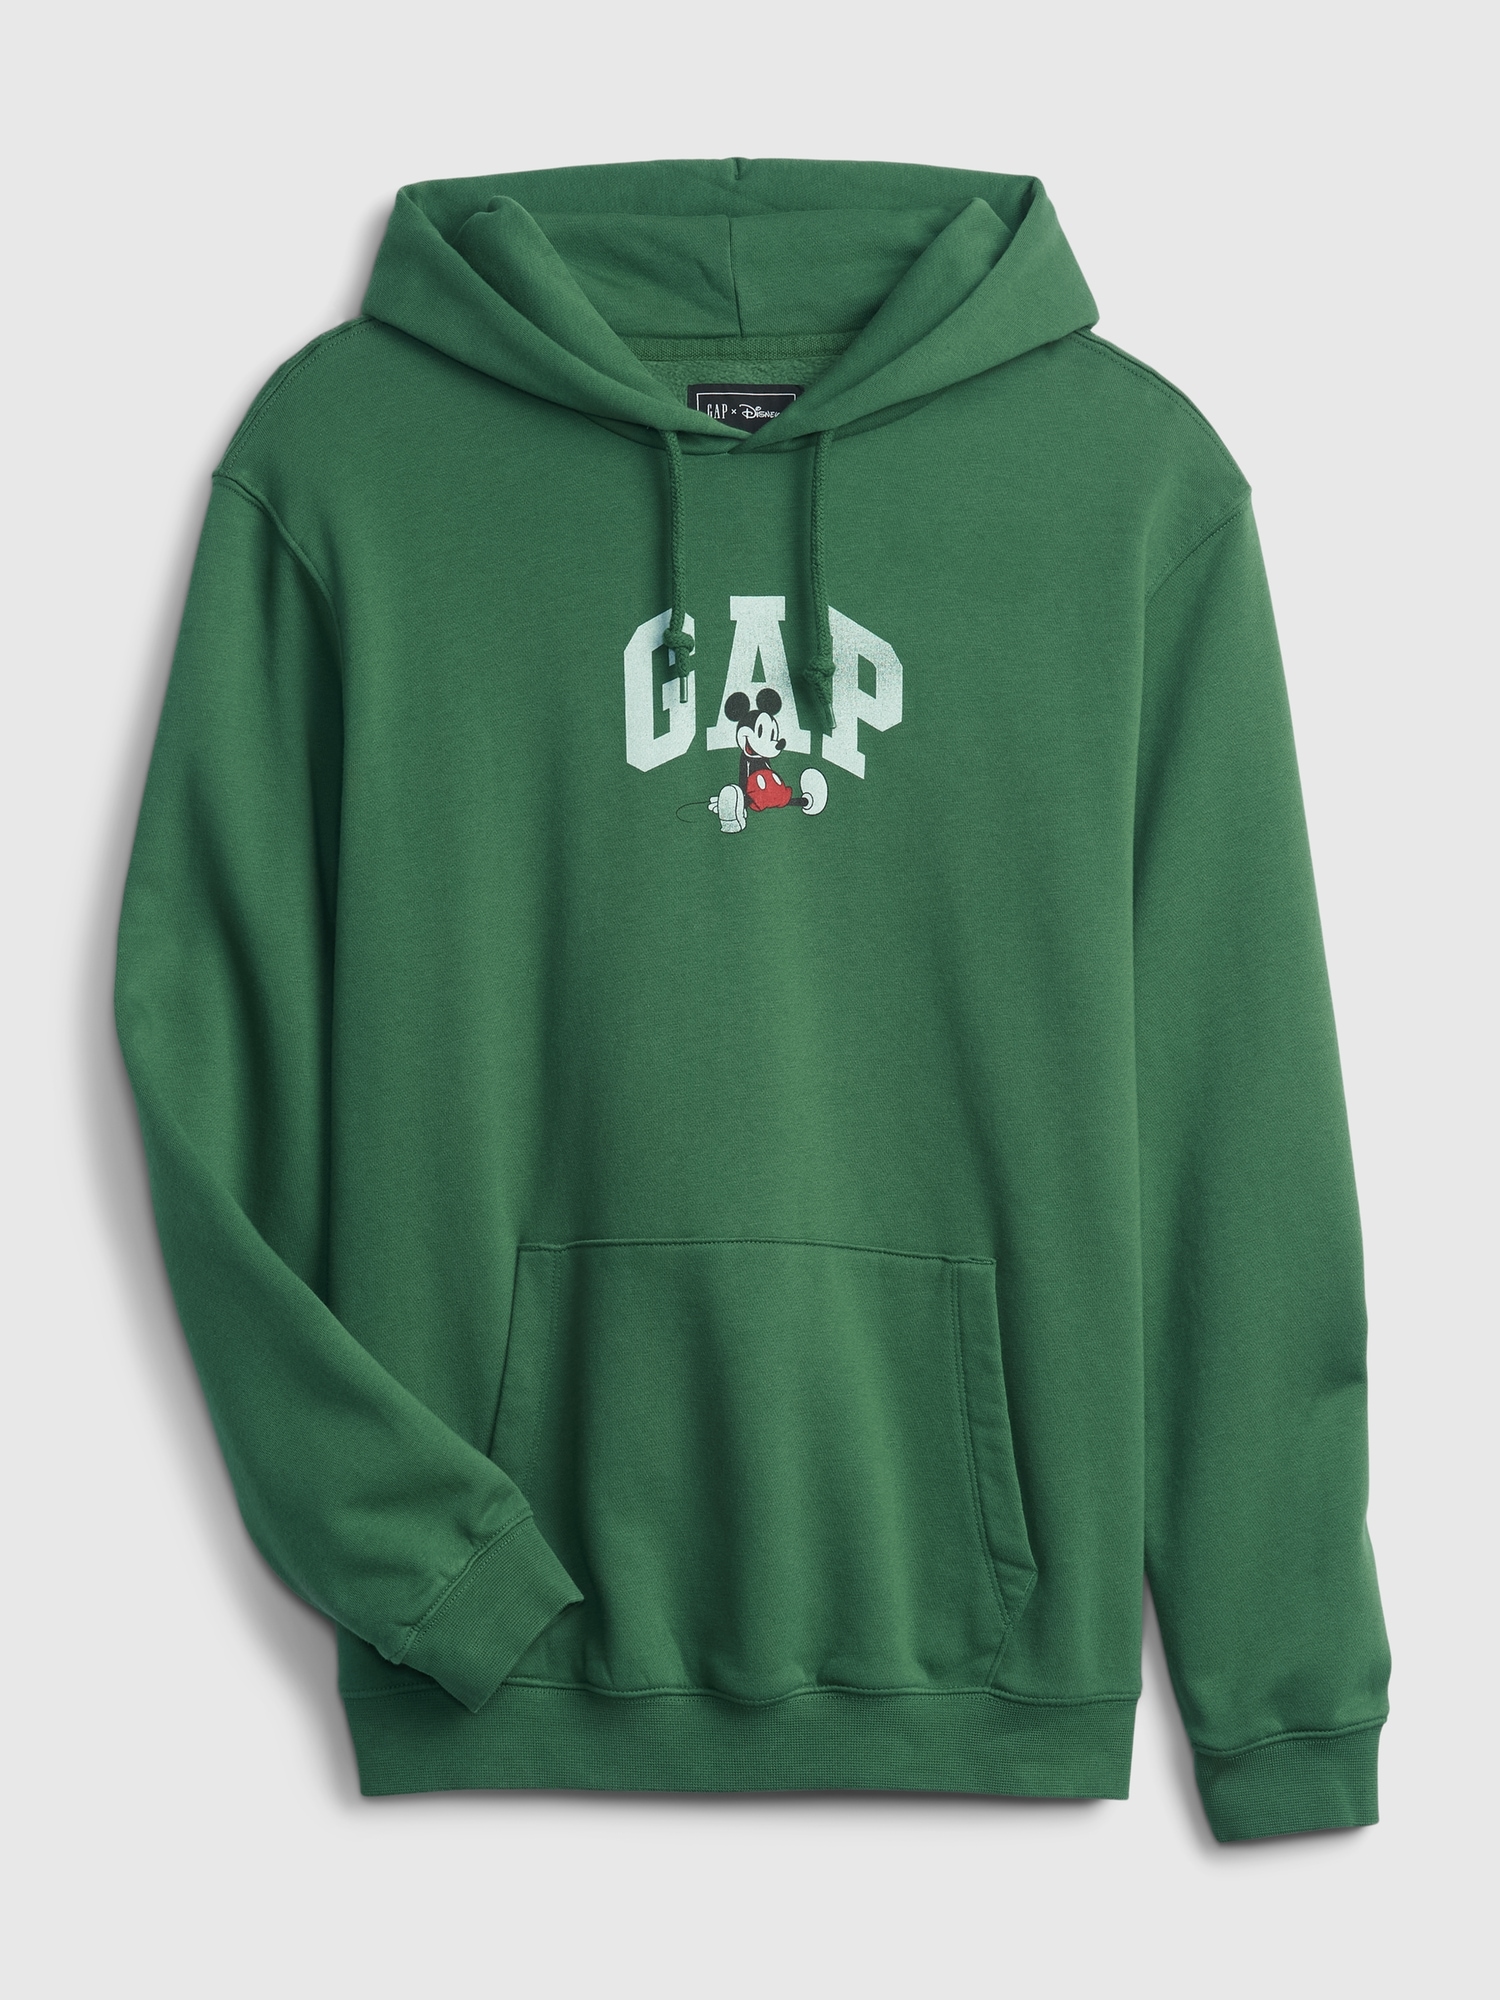 Gap x Disney Women's Clothing On Sale Up To 90% Off Retail